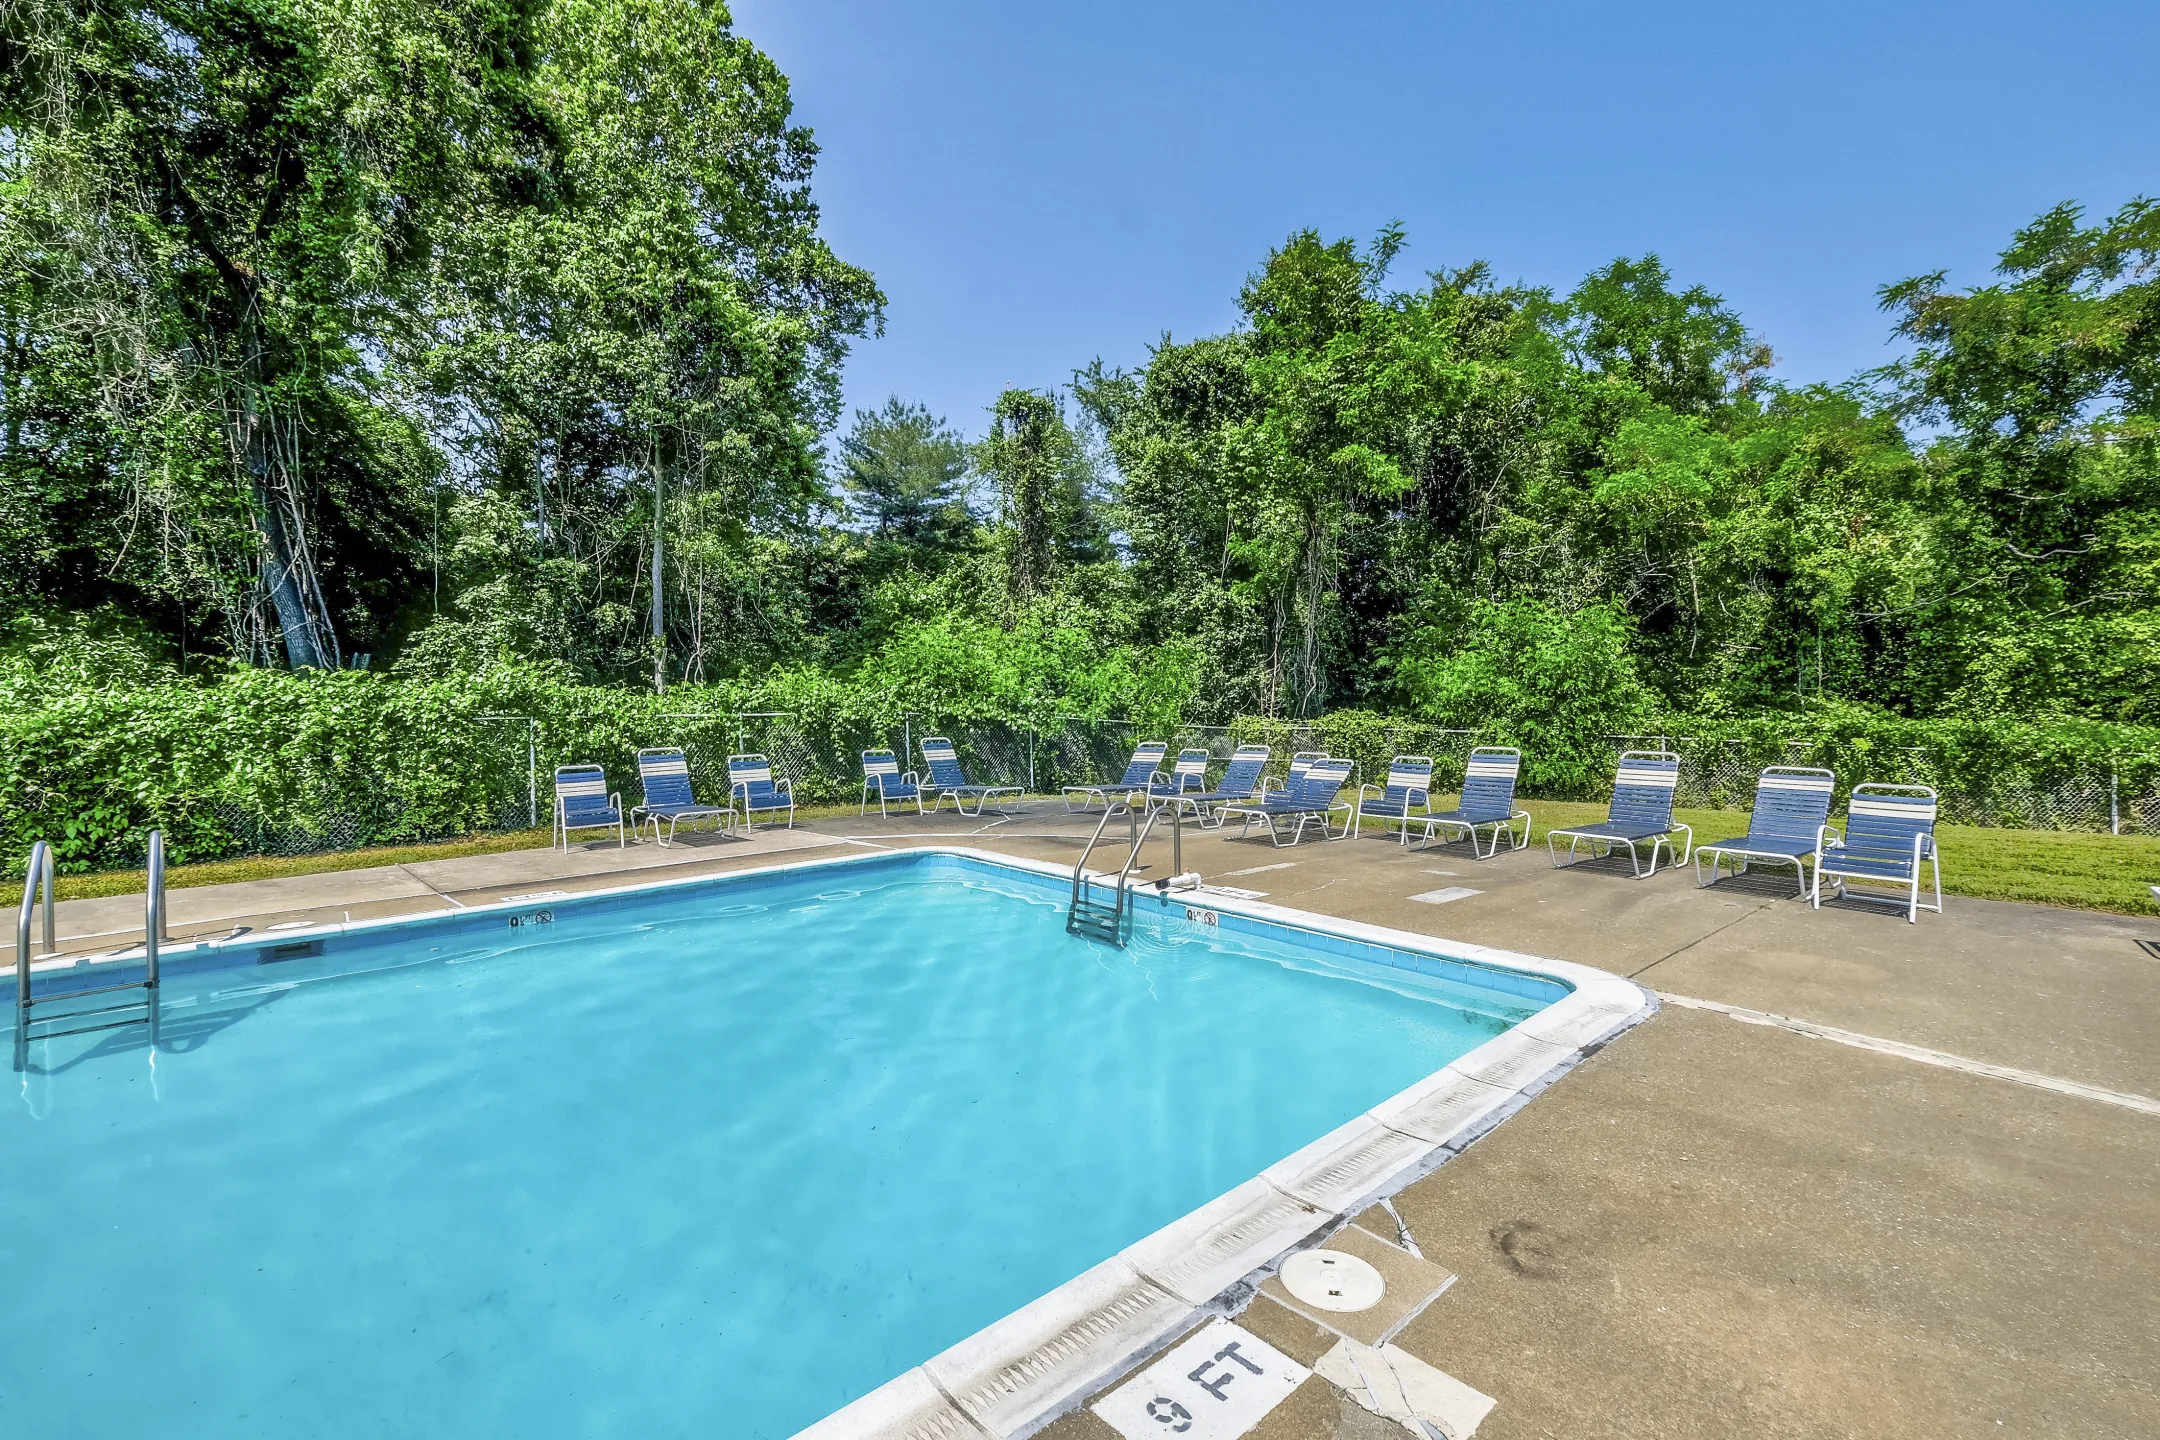 Pool - The Pointe at Harpers Mill - Millersville, MD